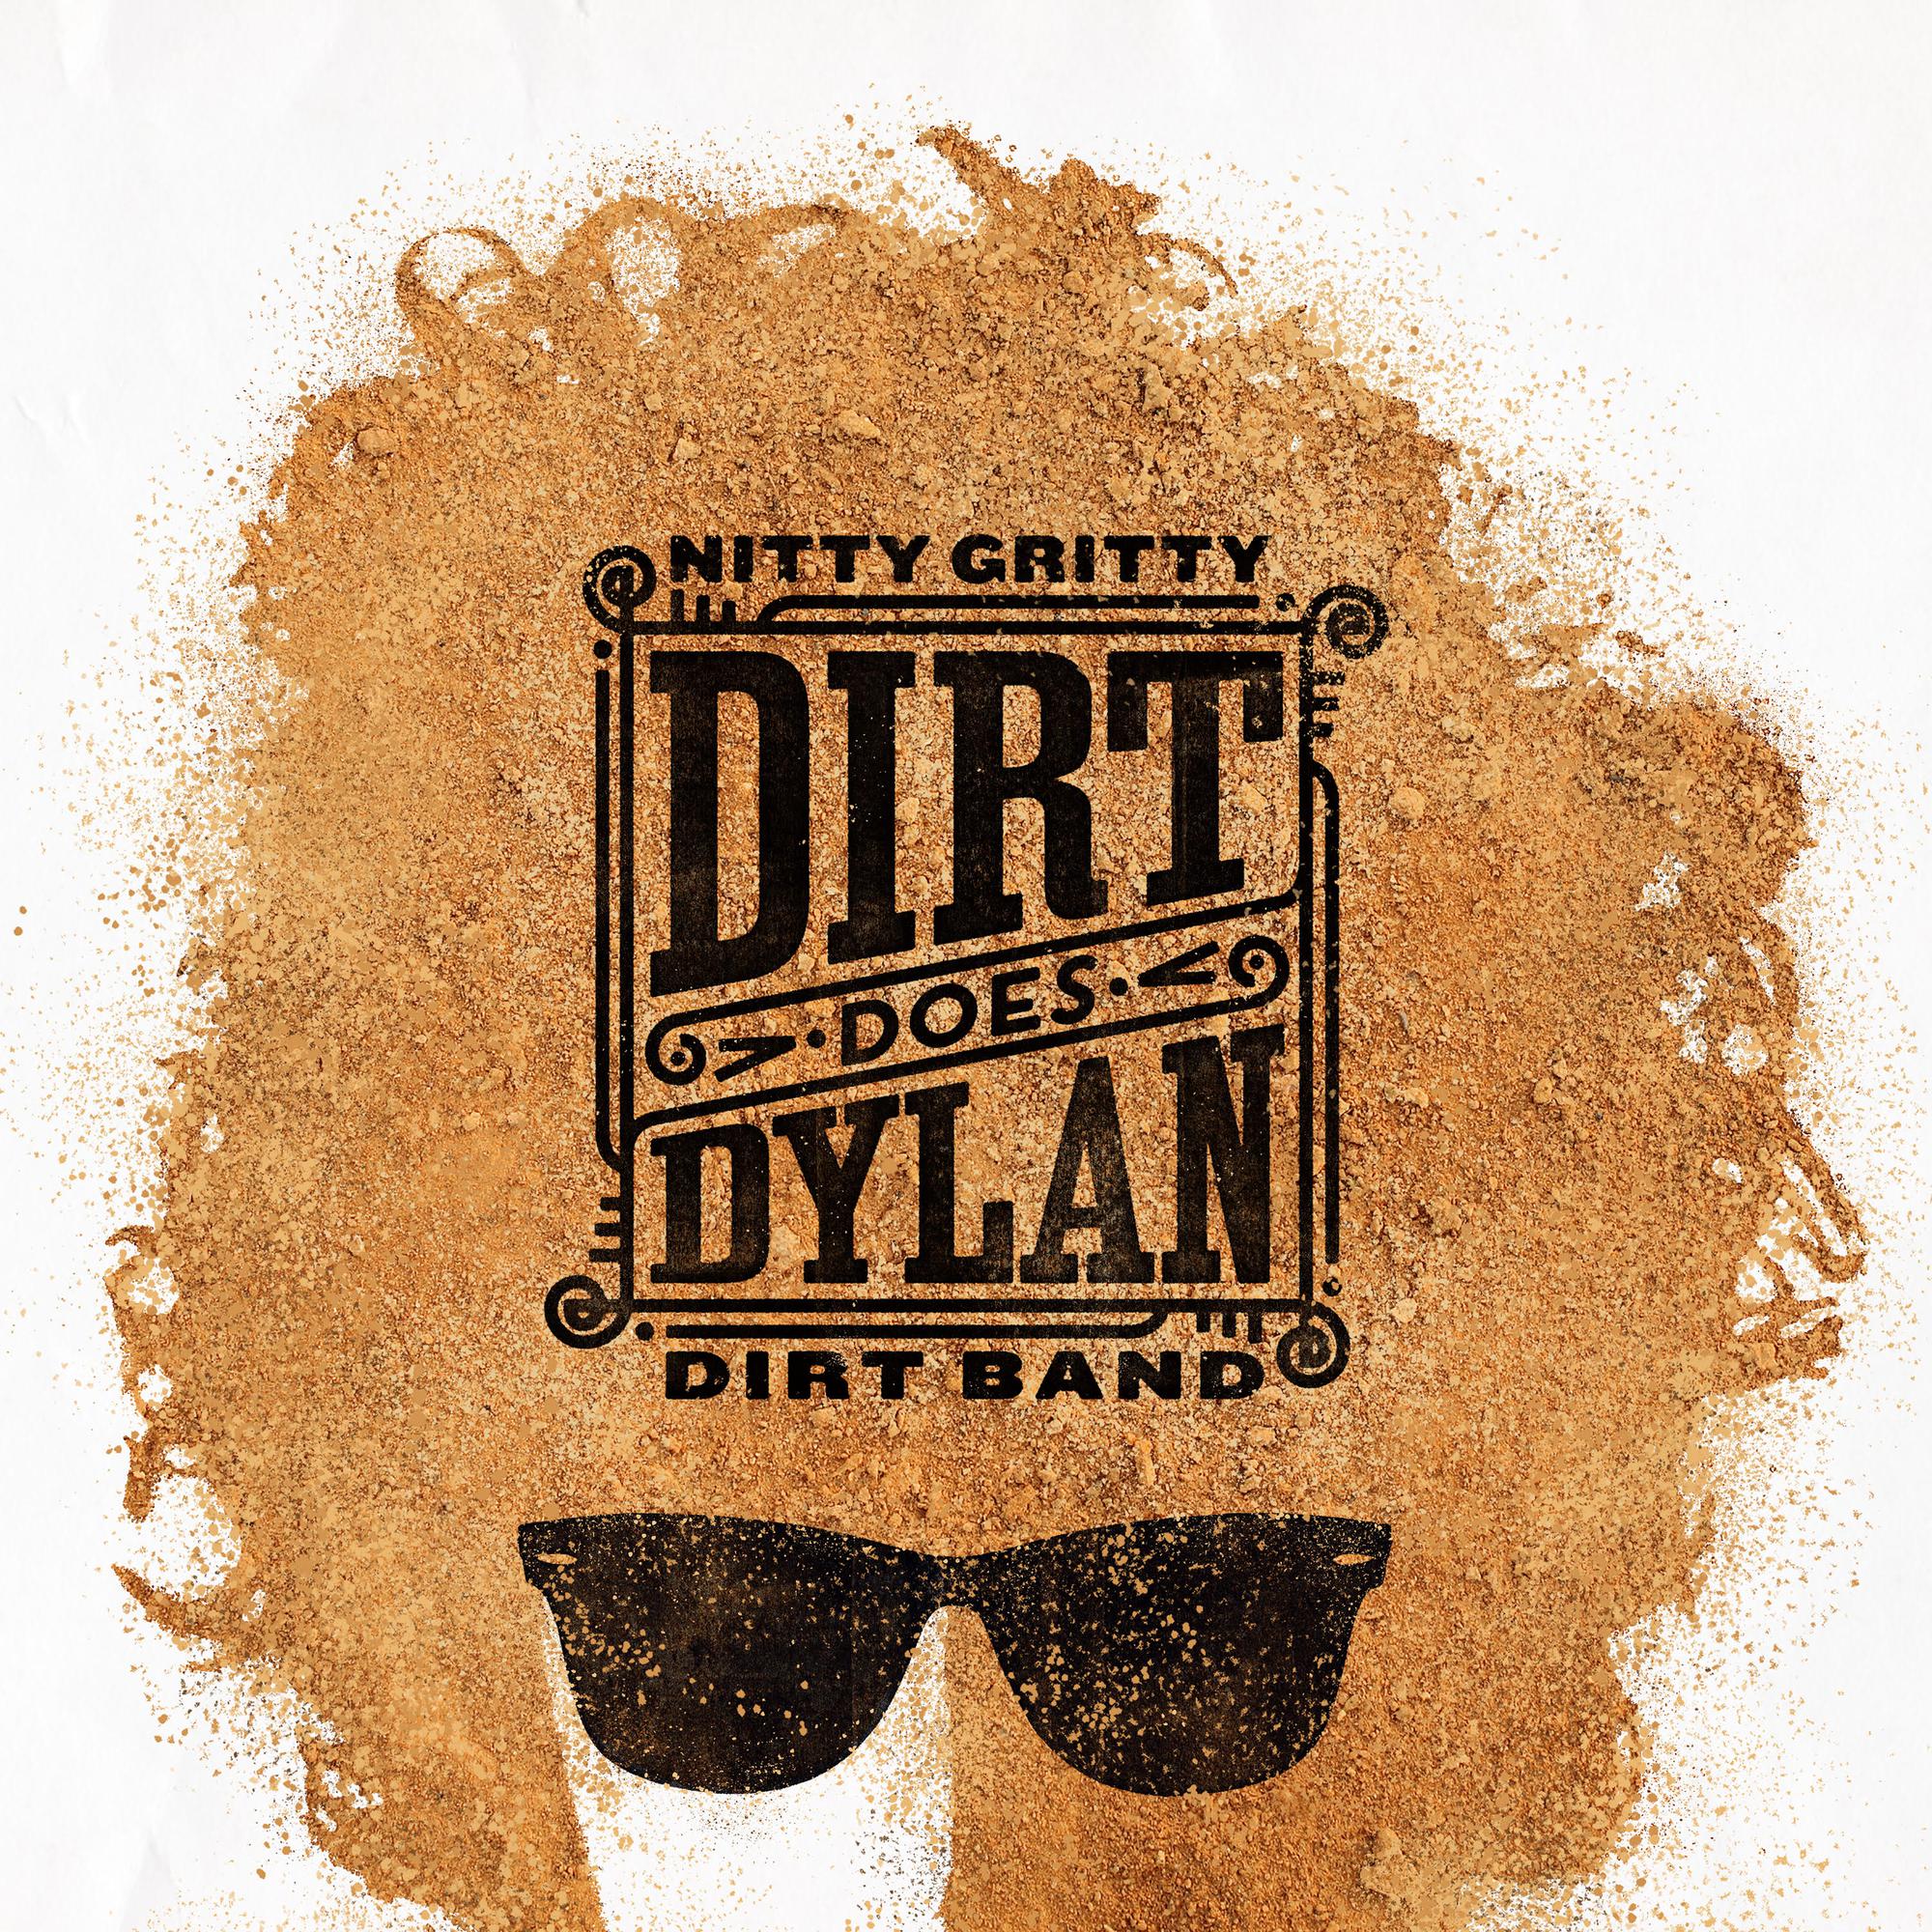 NITTY GRITTY DIRT BAND 'DIRT DOES DYLAN' LP